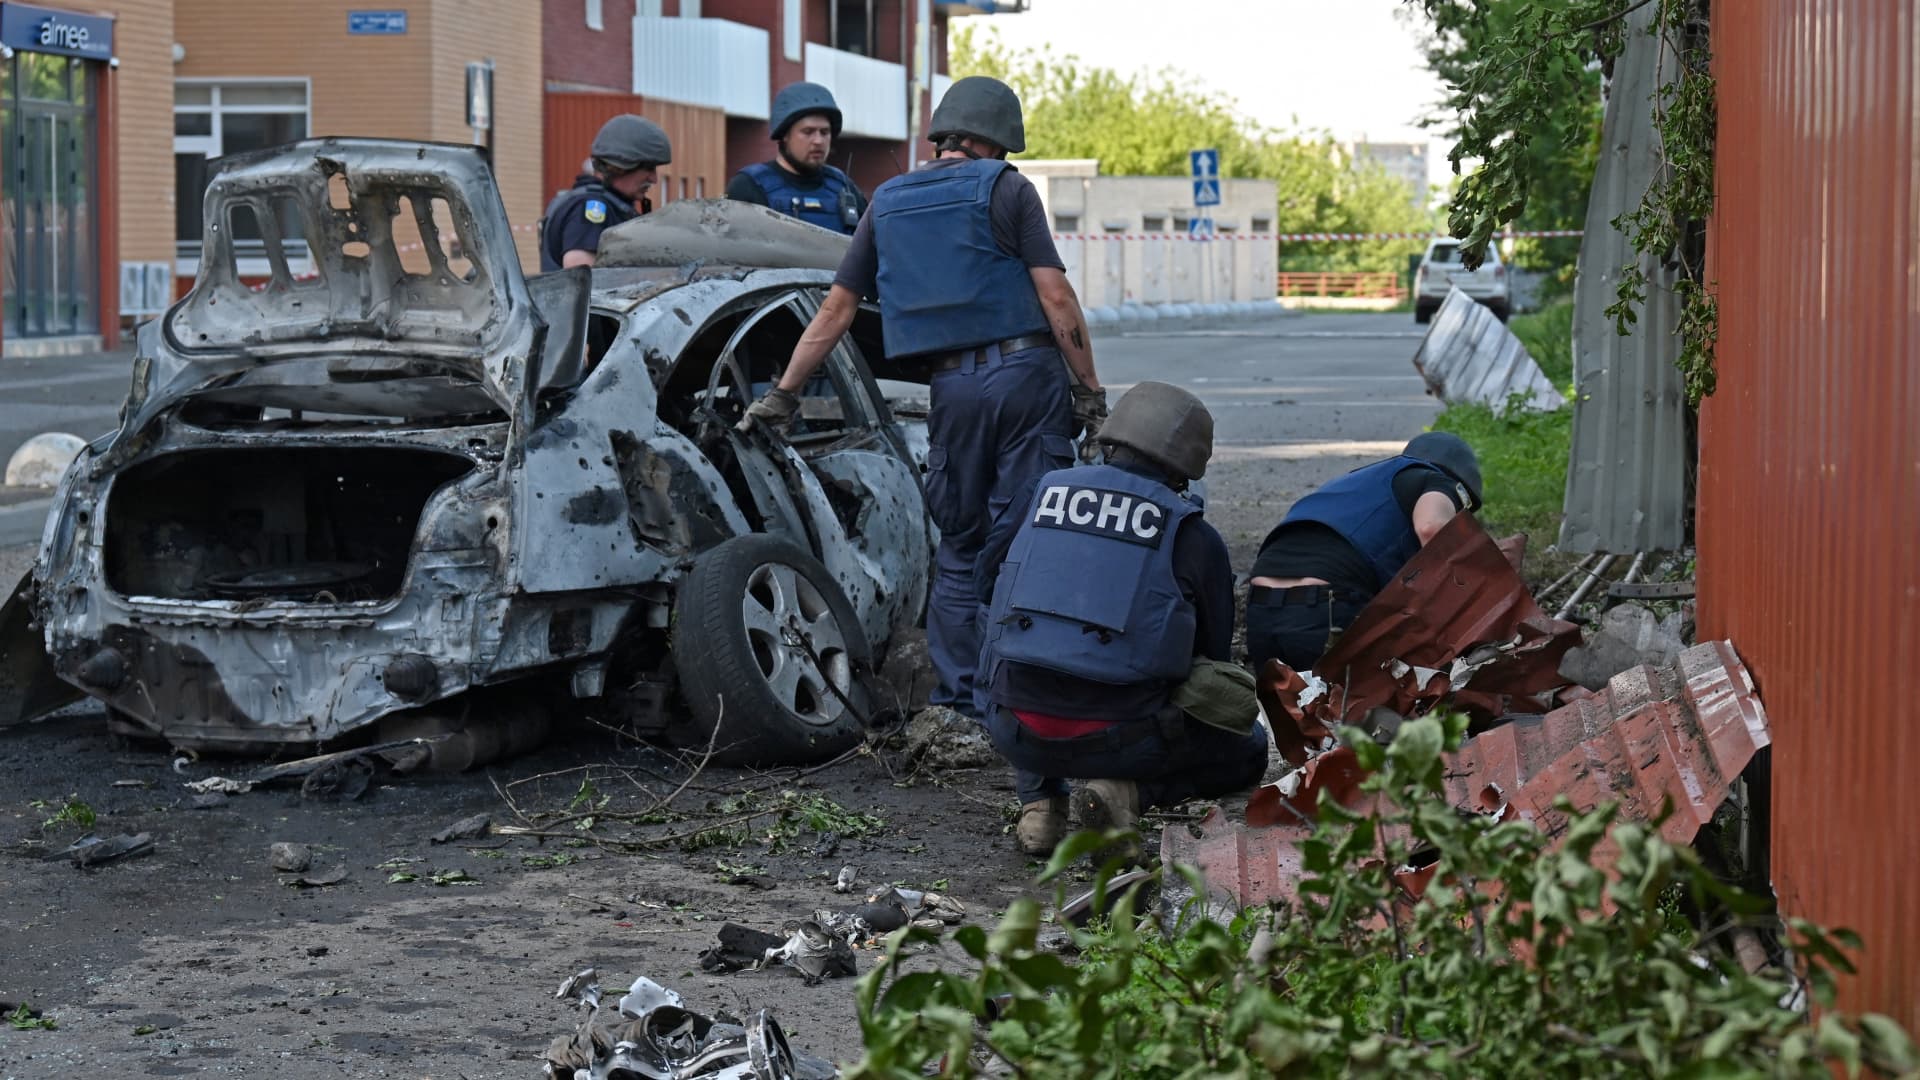 Deminers examine the site of a reported cluster munition fall after a rocket attack on a residential area in northern Kharkiv, on August 8, 2022, amid the Russian military invasion launched on Ukraine.